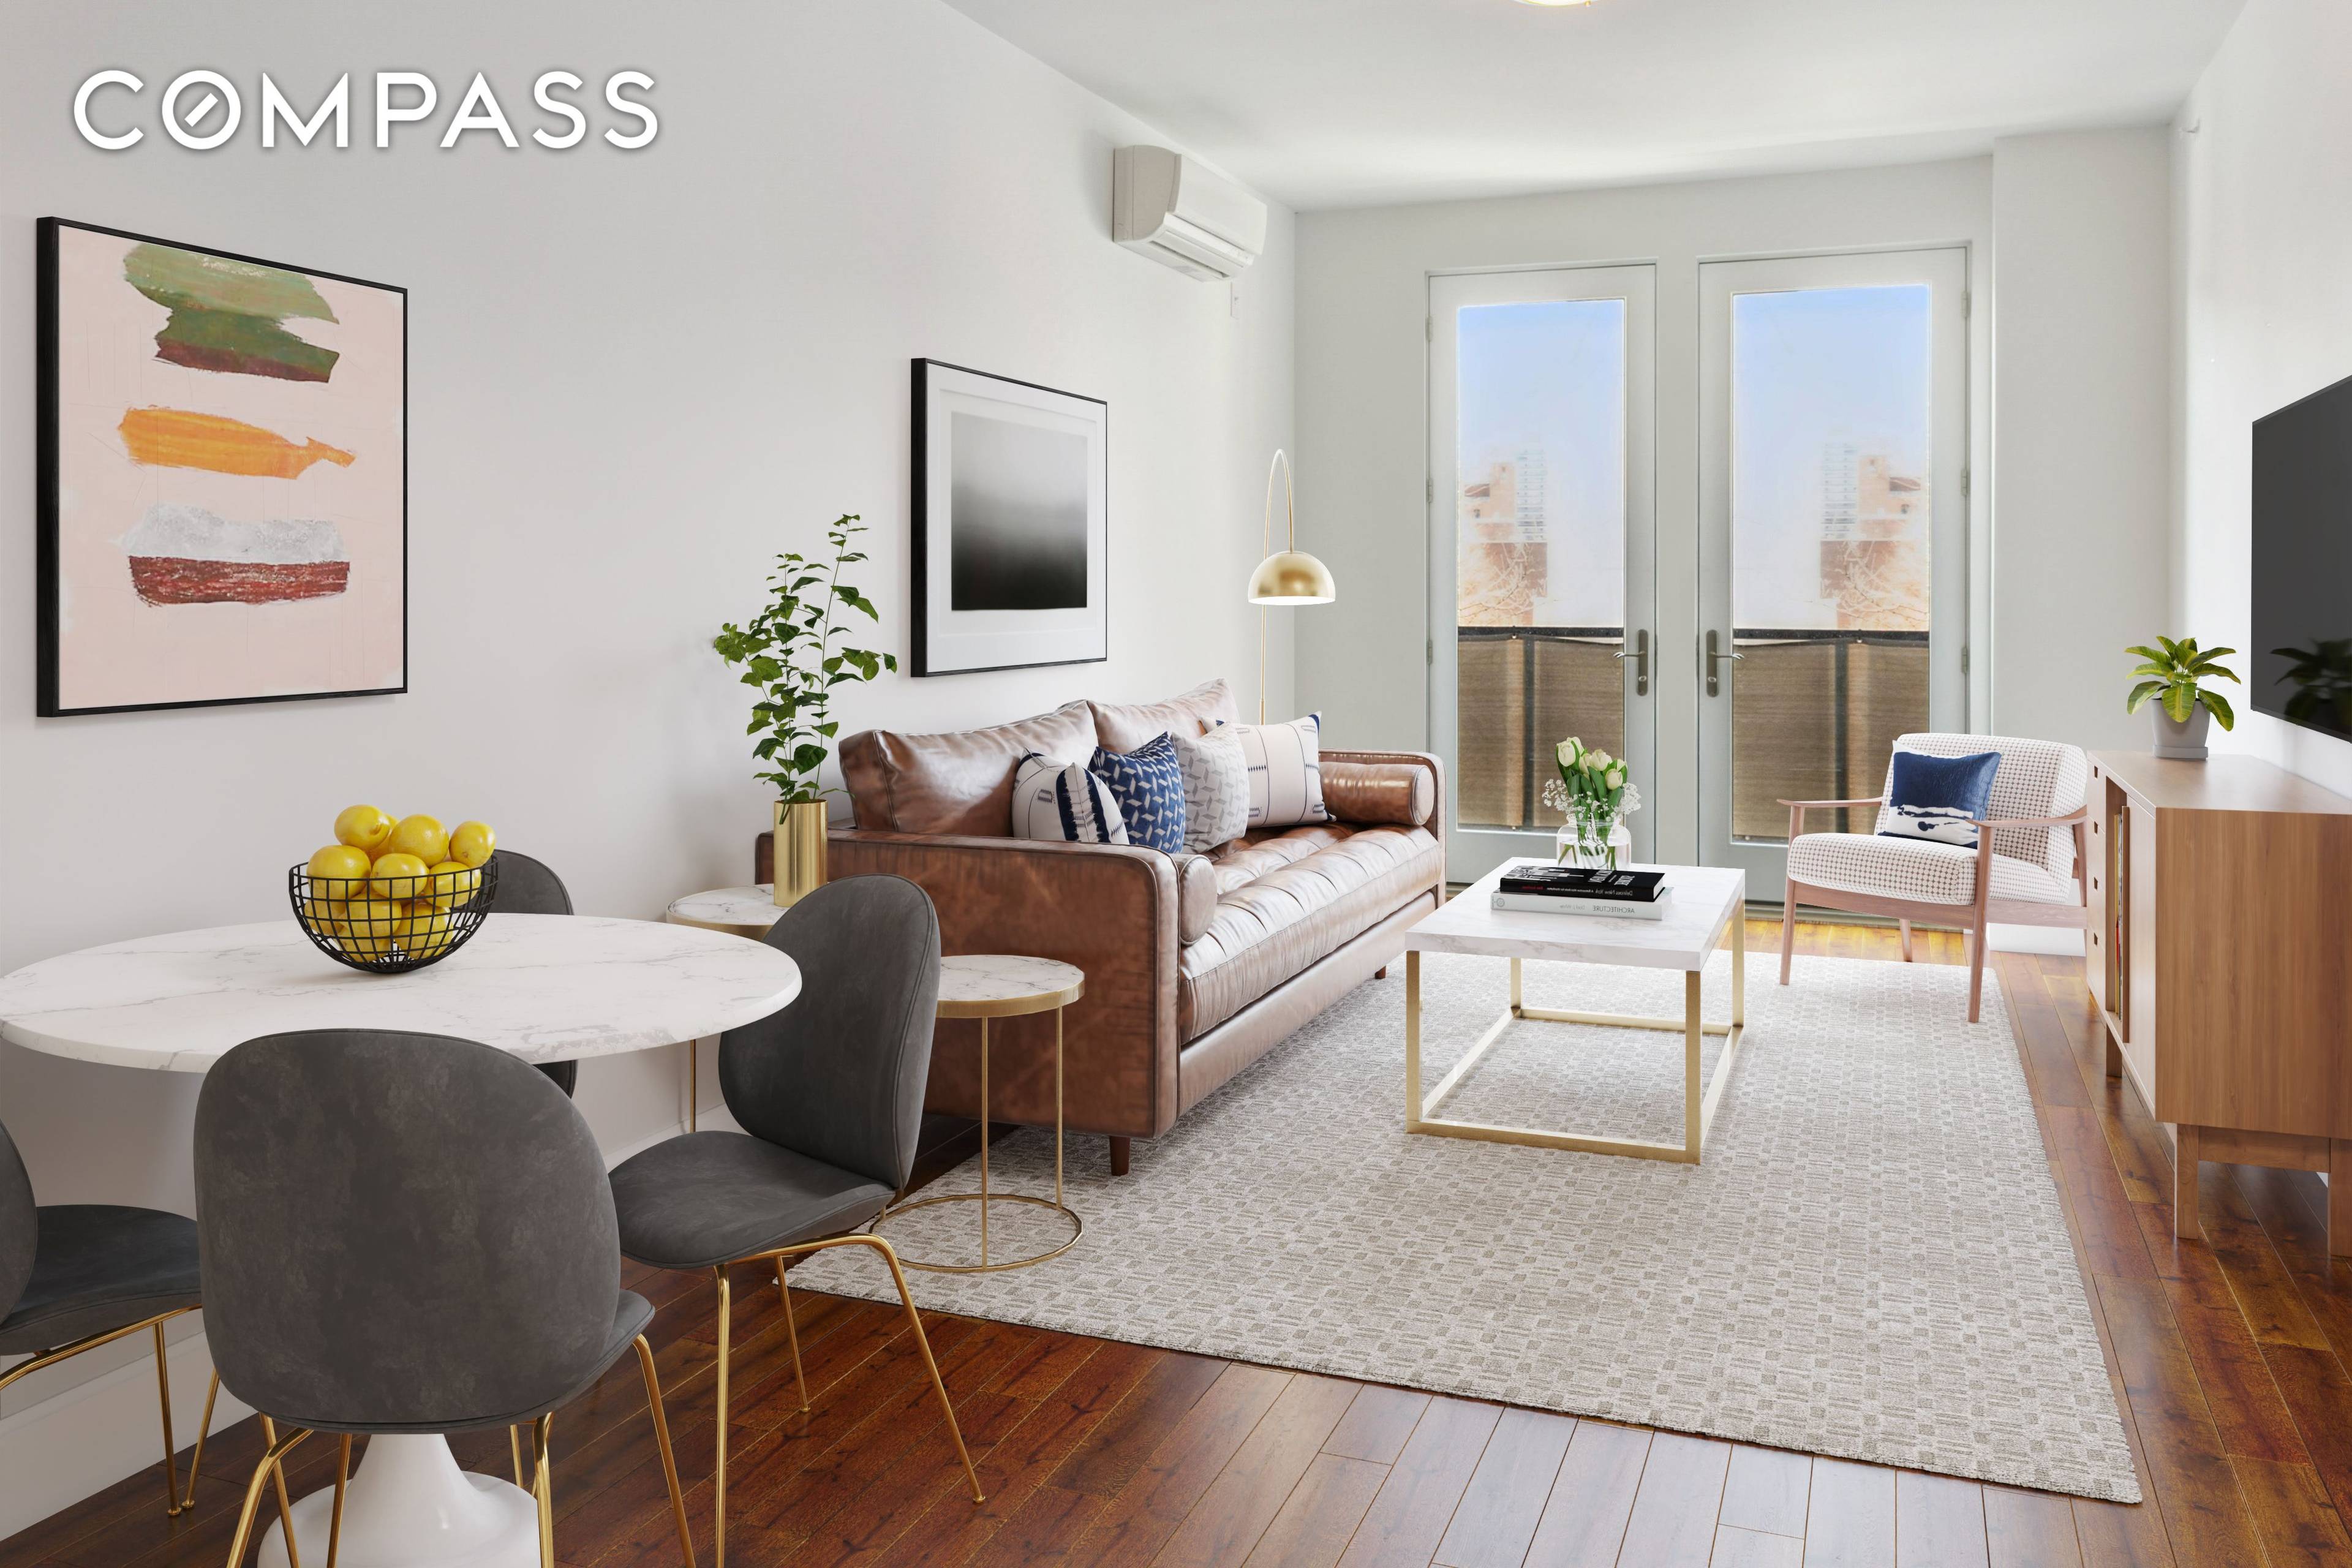 This one bedroom, one bathroom apartment in one of the most sought after newly built developments in Forest Hills exudes both elegance and comfort.